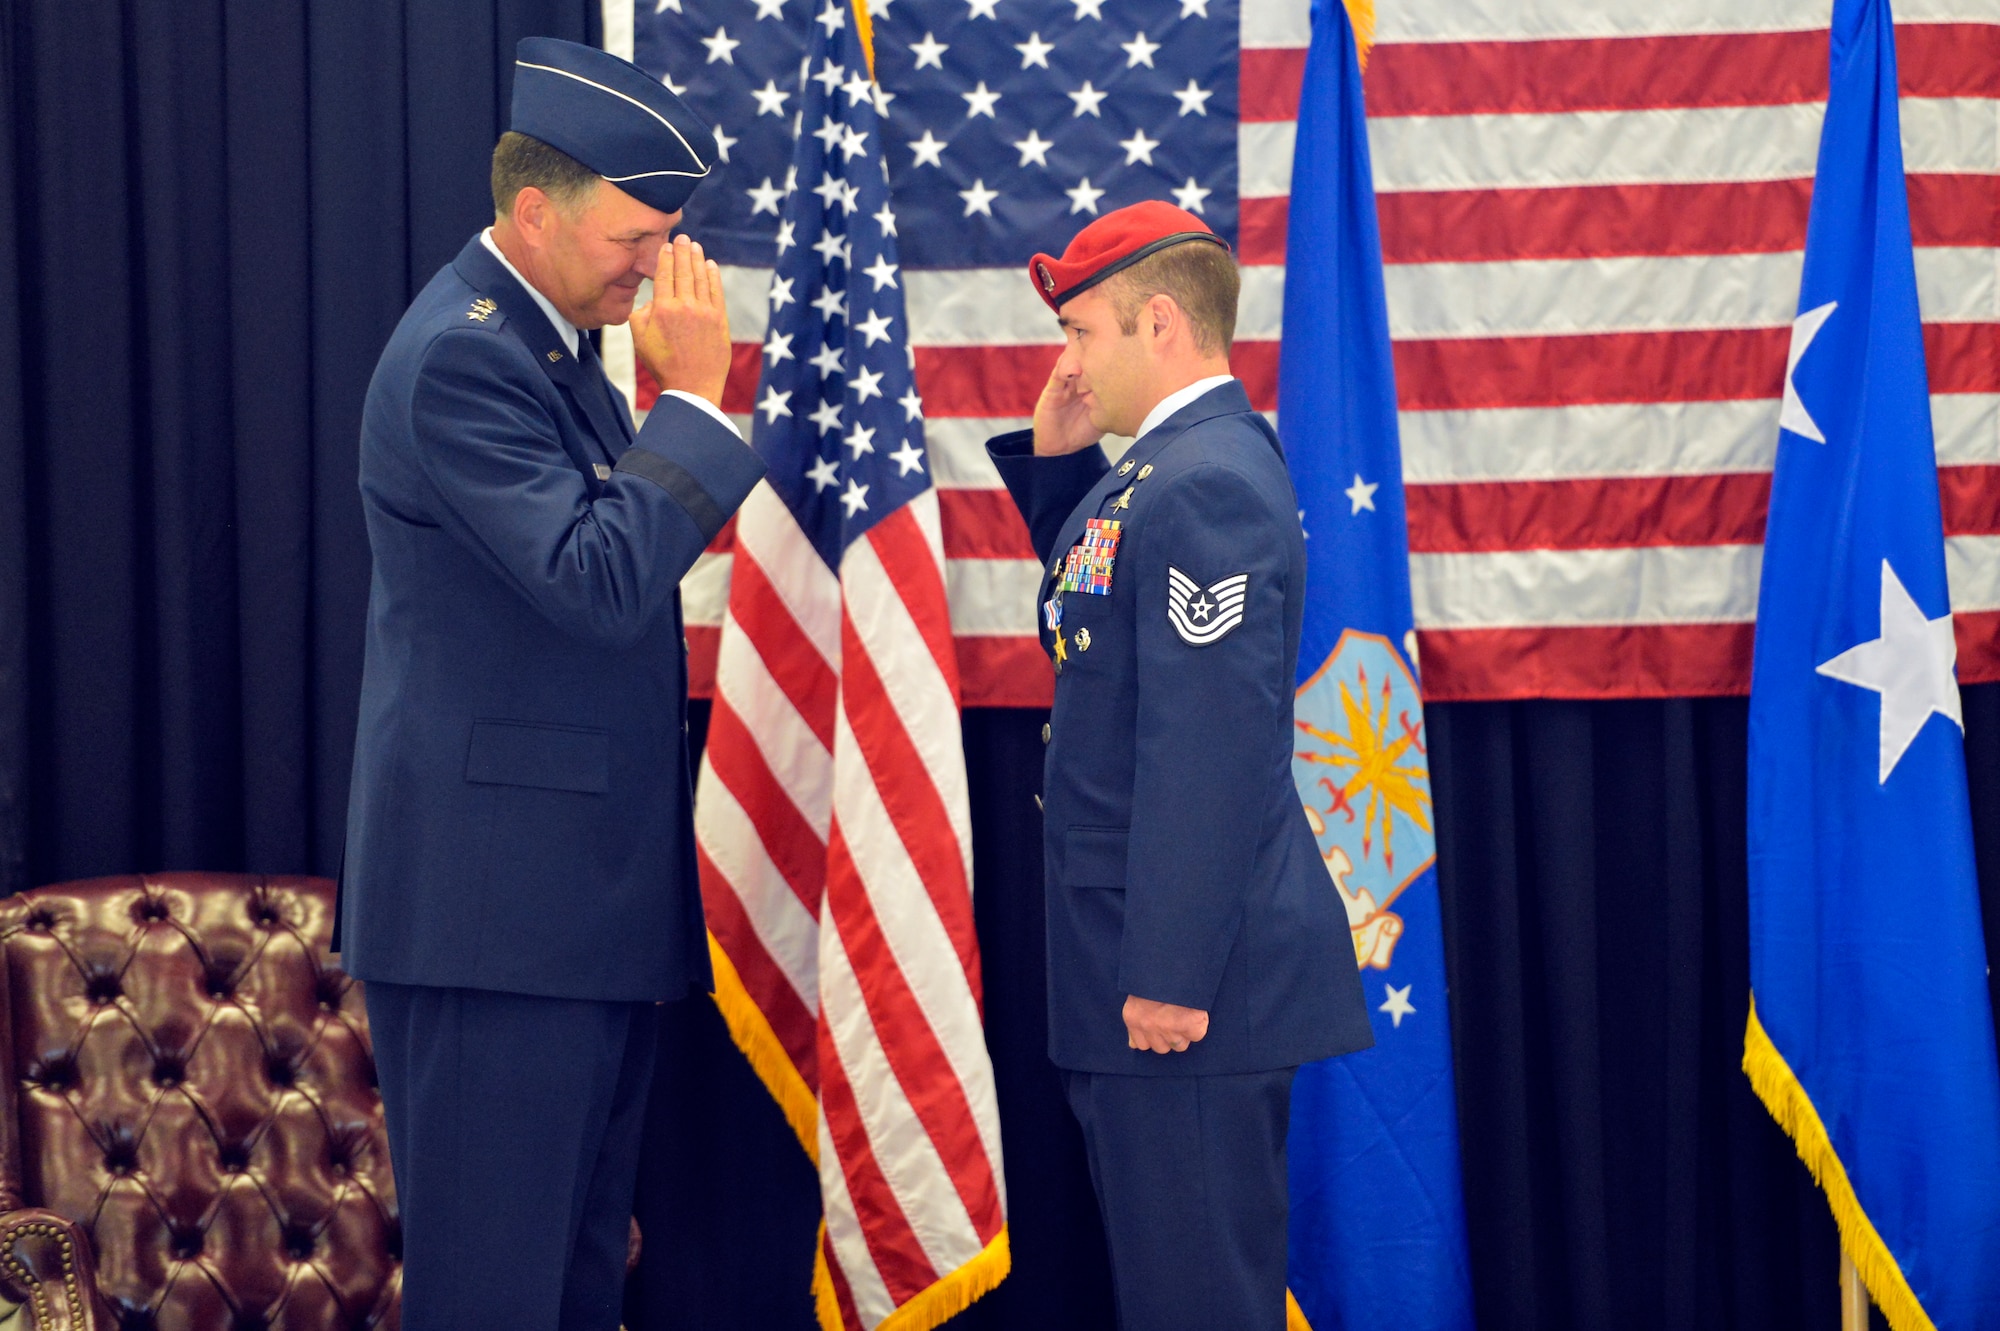 Tech. Sgt. Matthew McKenna (right), 22nd Special Tactics Squadron combat controller salutes Lt. Gen. Bradley Heithold, Air Force Special Operations Command commander Aug. 18, 2014, after being awarded the Silver Star during the 22nd STS awards ceremony at Joint Base Lewis-McChord, Wash. McKenna was the fourth 22nd STS member to earn the medal for operations conducted in Iraq and Afghanistan. (U.S. Air Force photo/Staff Sgt. Russ Jackson)